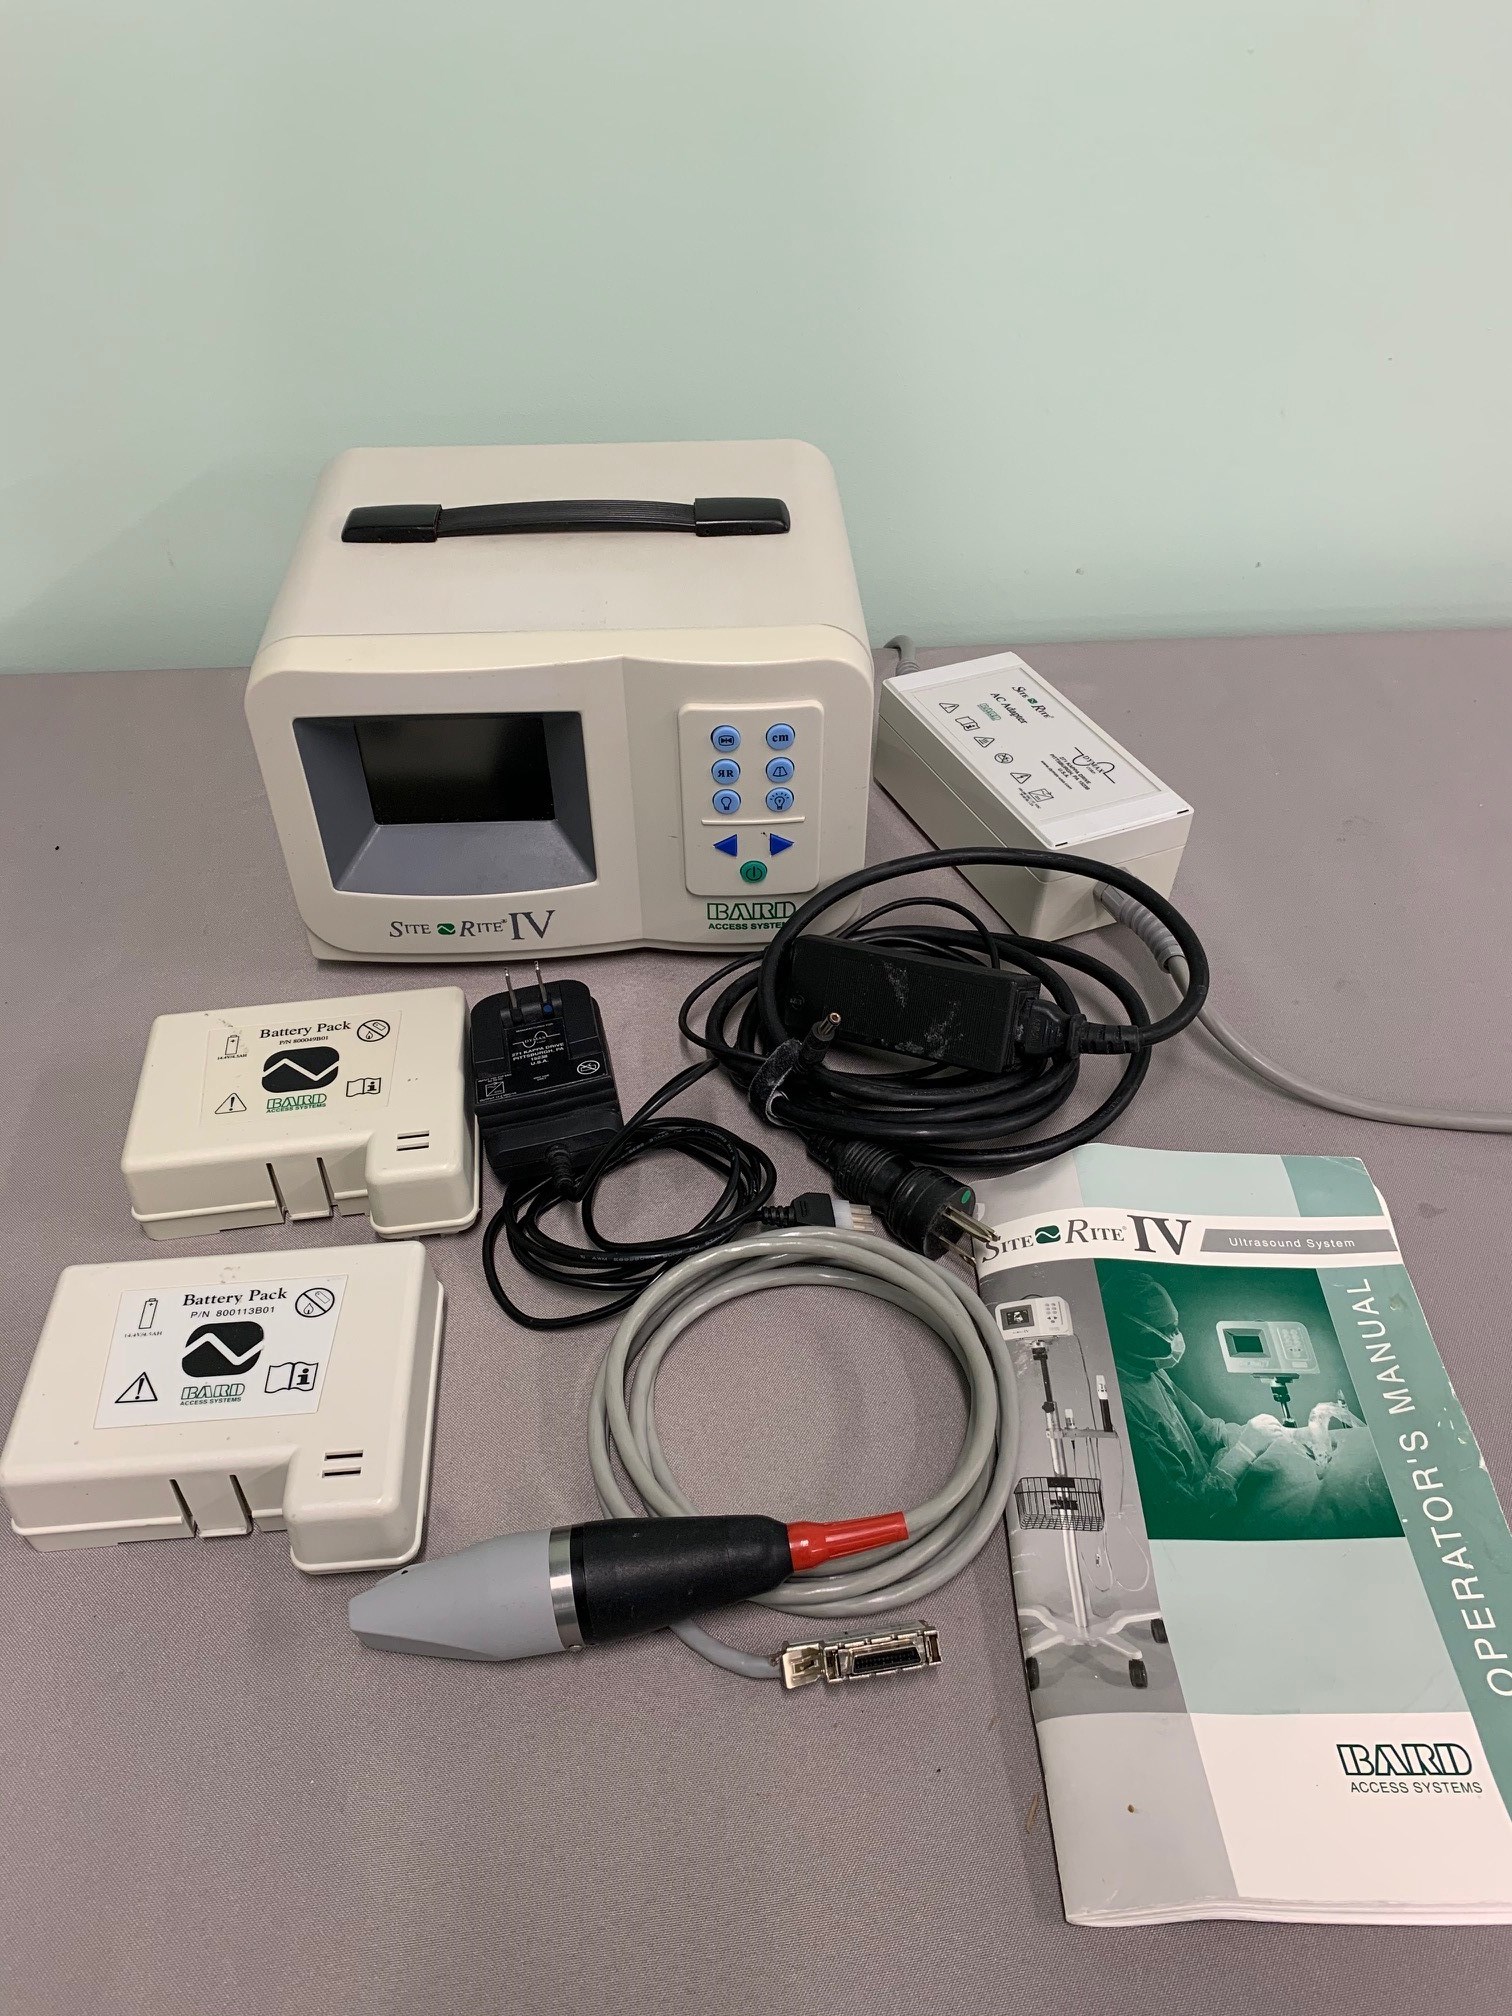 Bard Access Systems Site Rite IV Ultrasound System